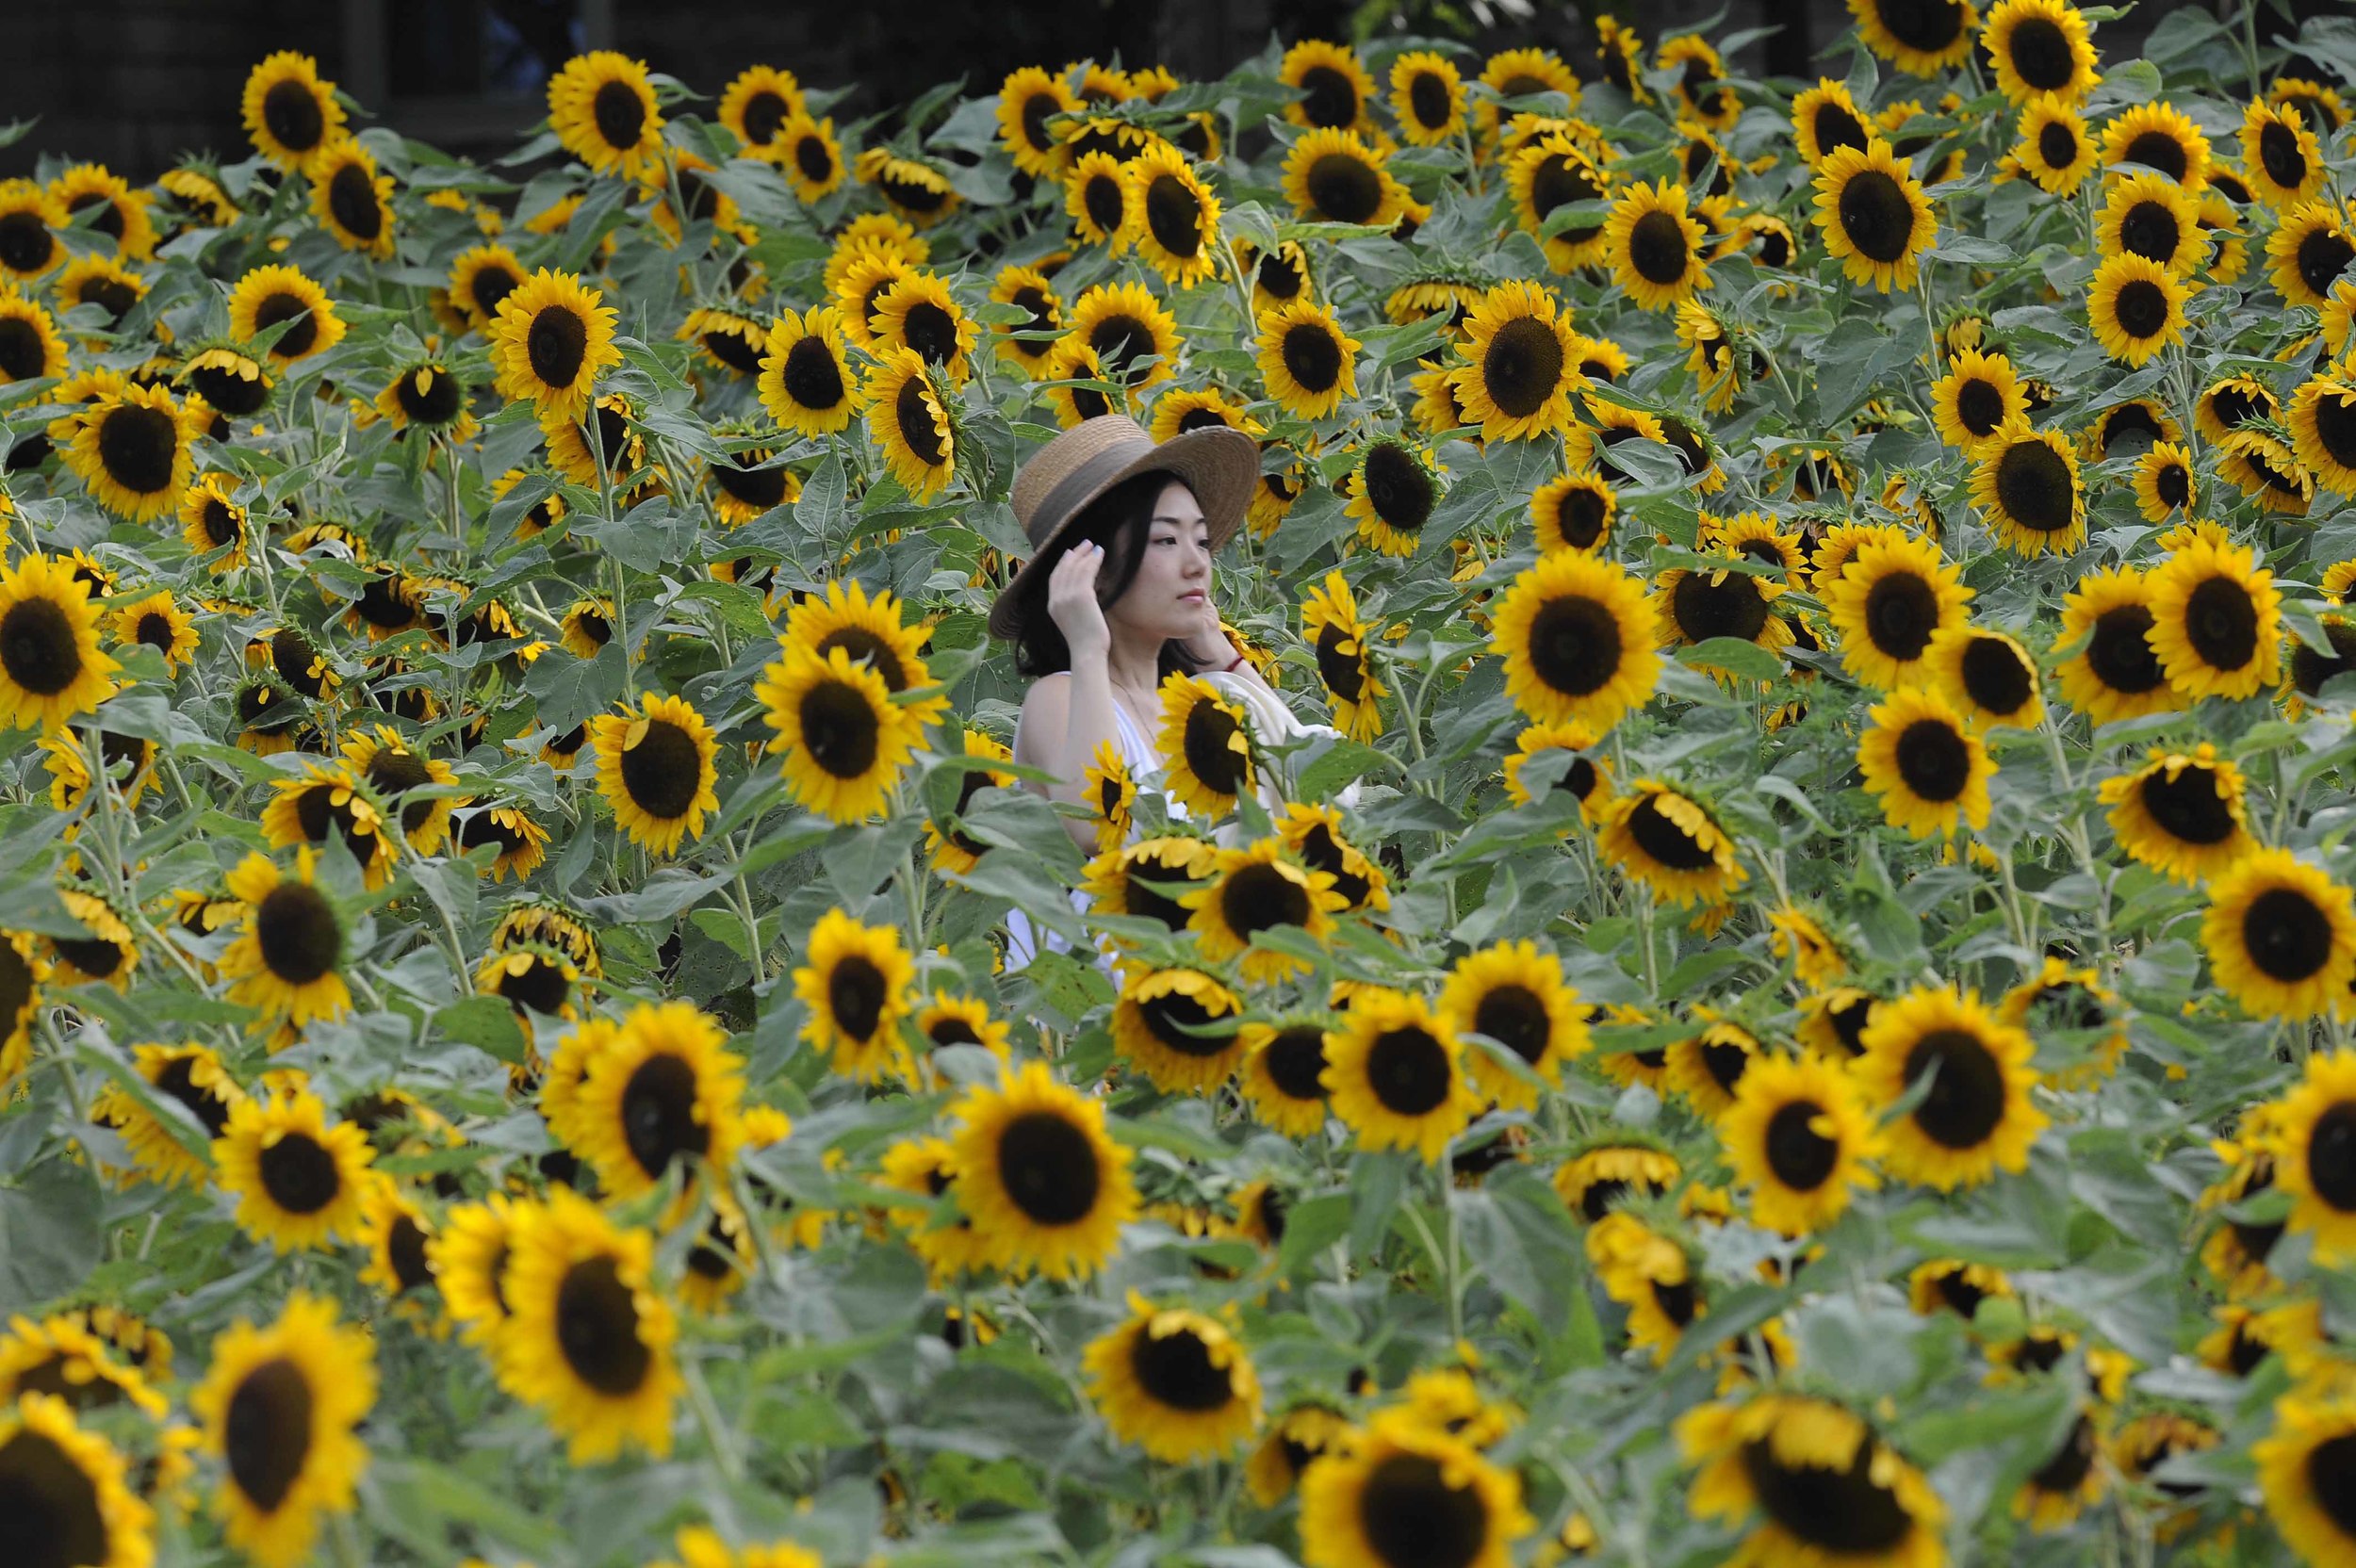  Mihoe among sun flowers in East Moriches, NY. 